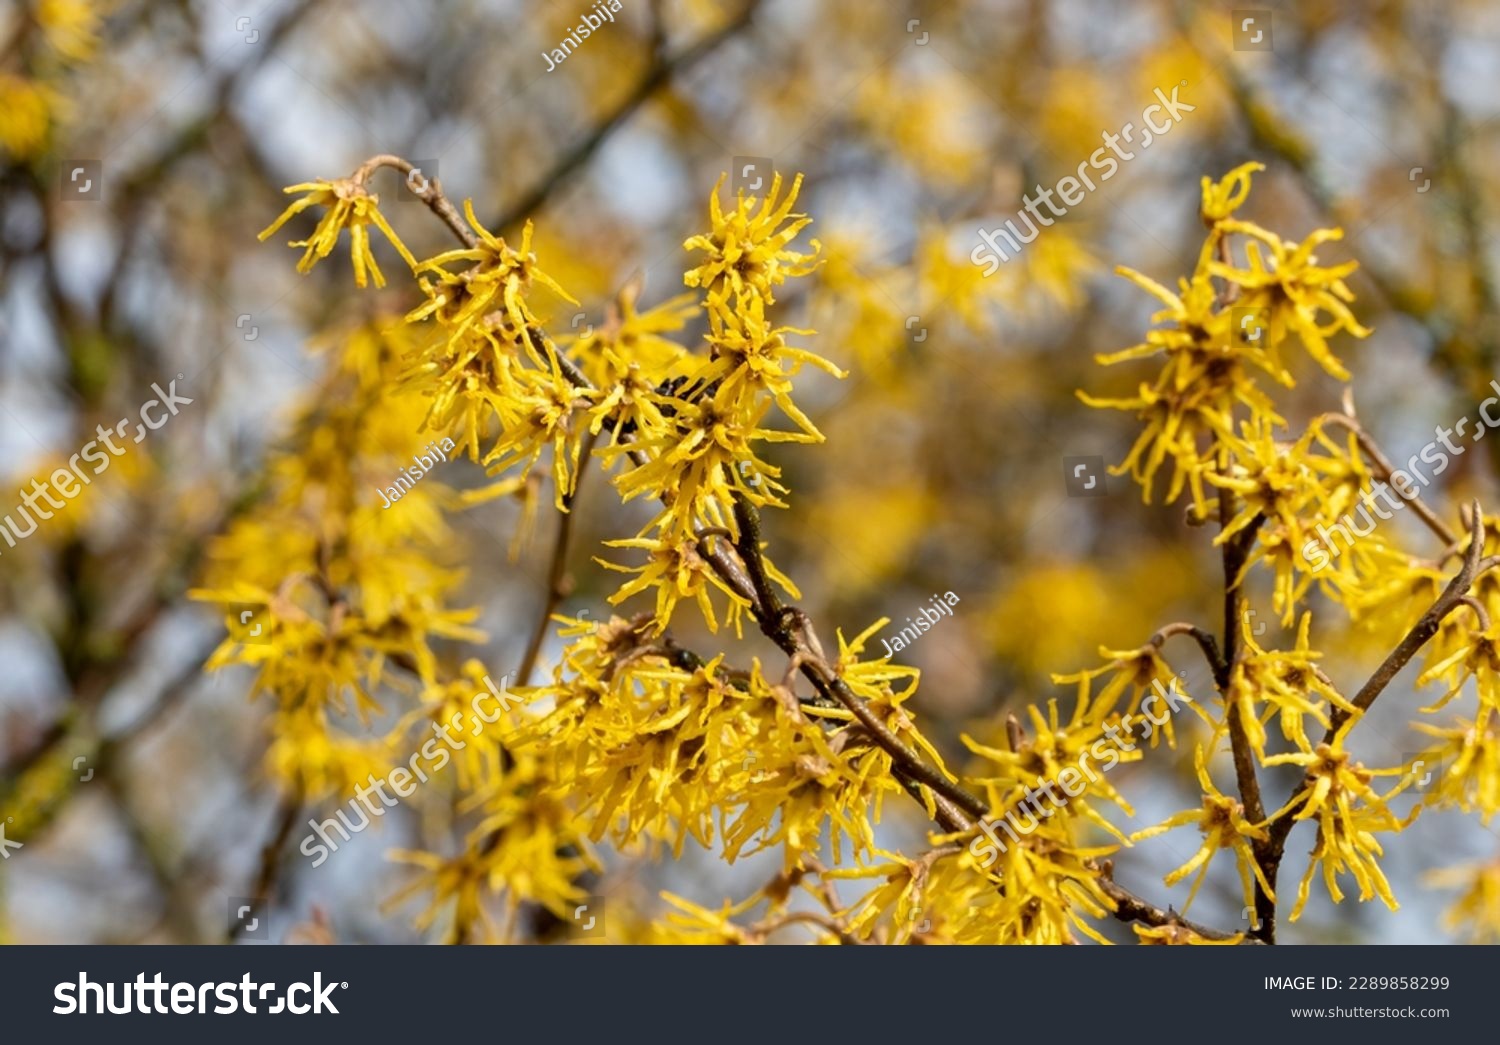 The witch hazel (Hamamelis virginiana) bush blooms with yellow flowers very early in the spring. Other names - Beadwood, American witch hazel, common witch hazel. #2289858299